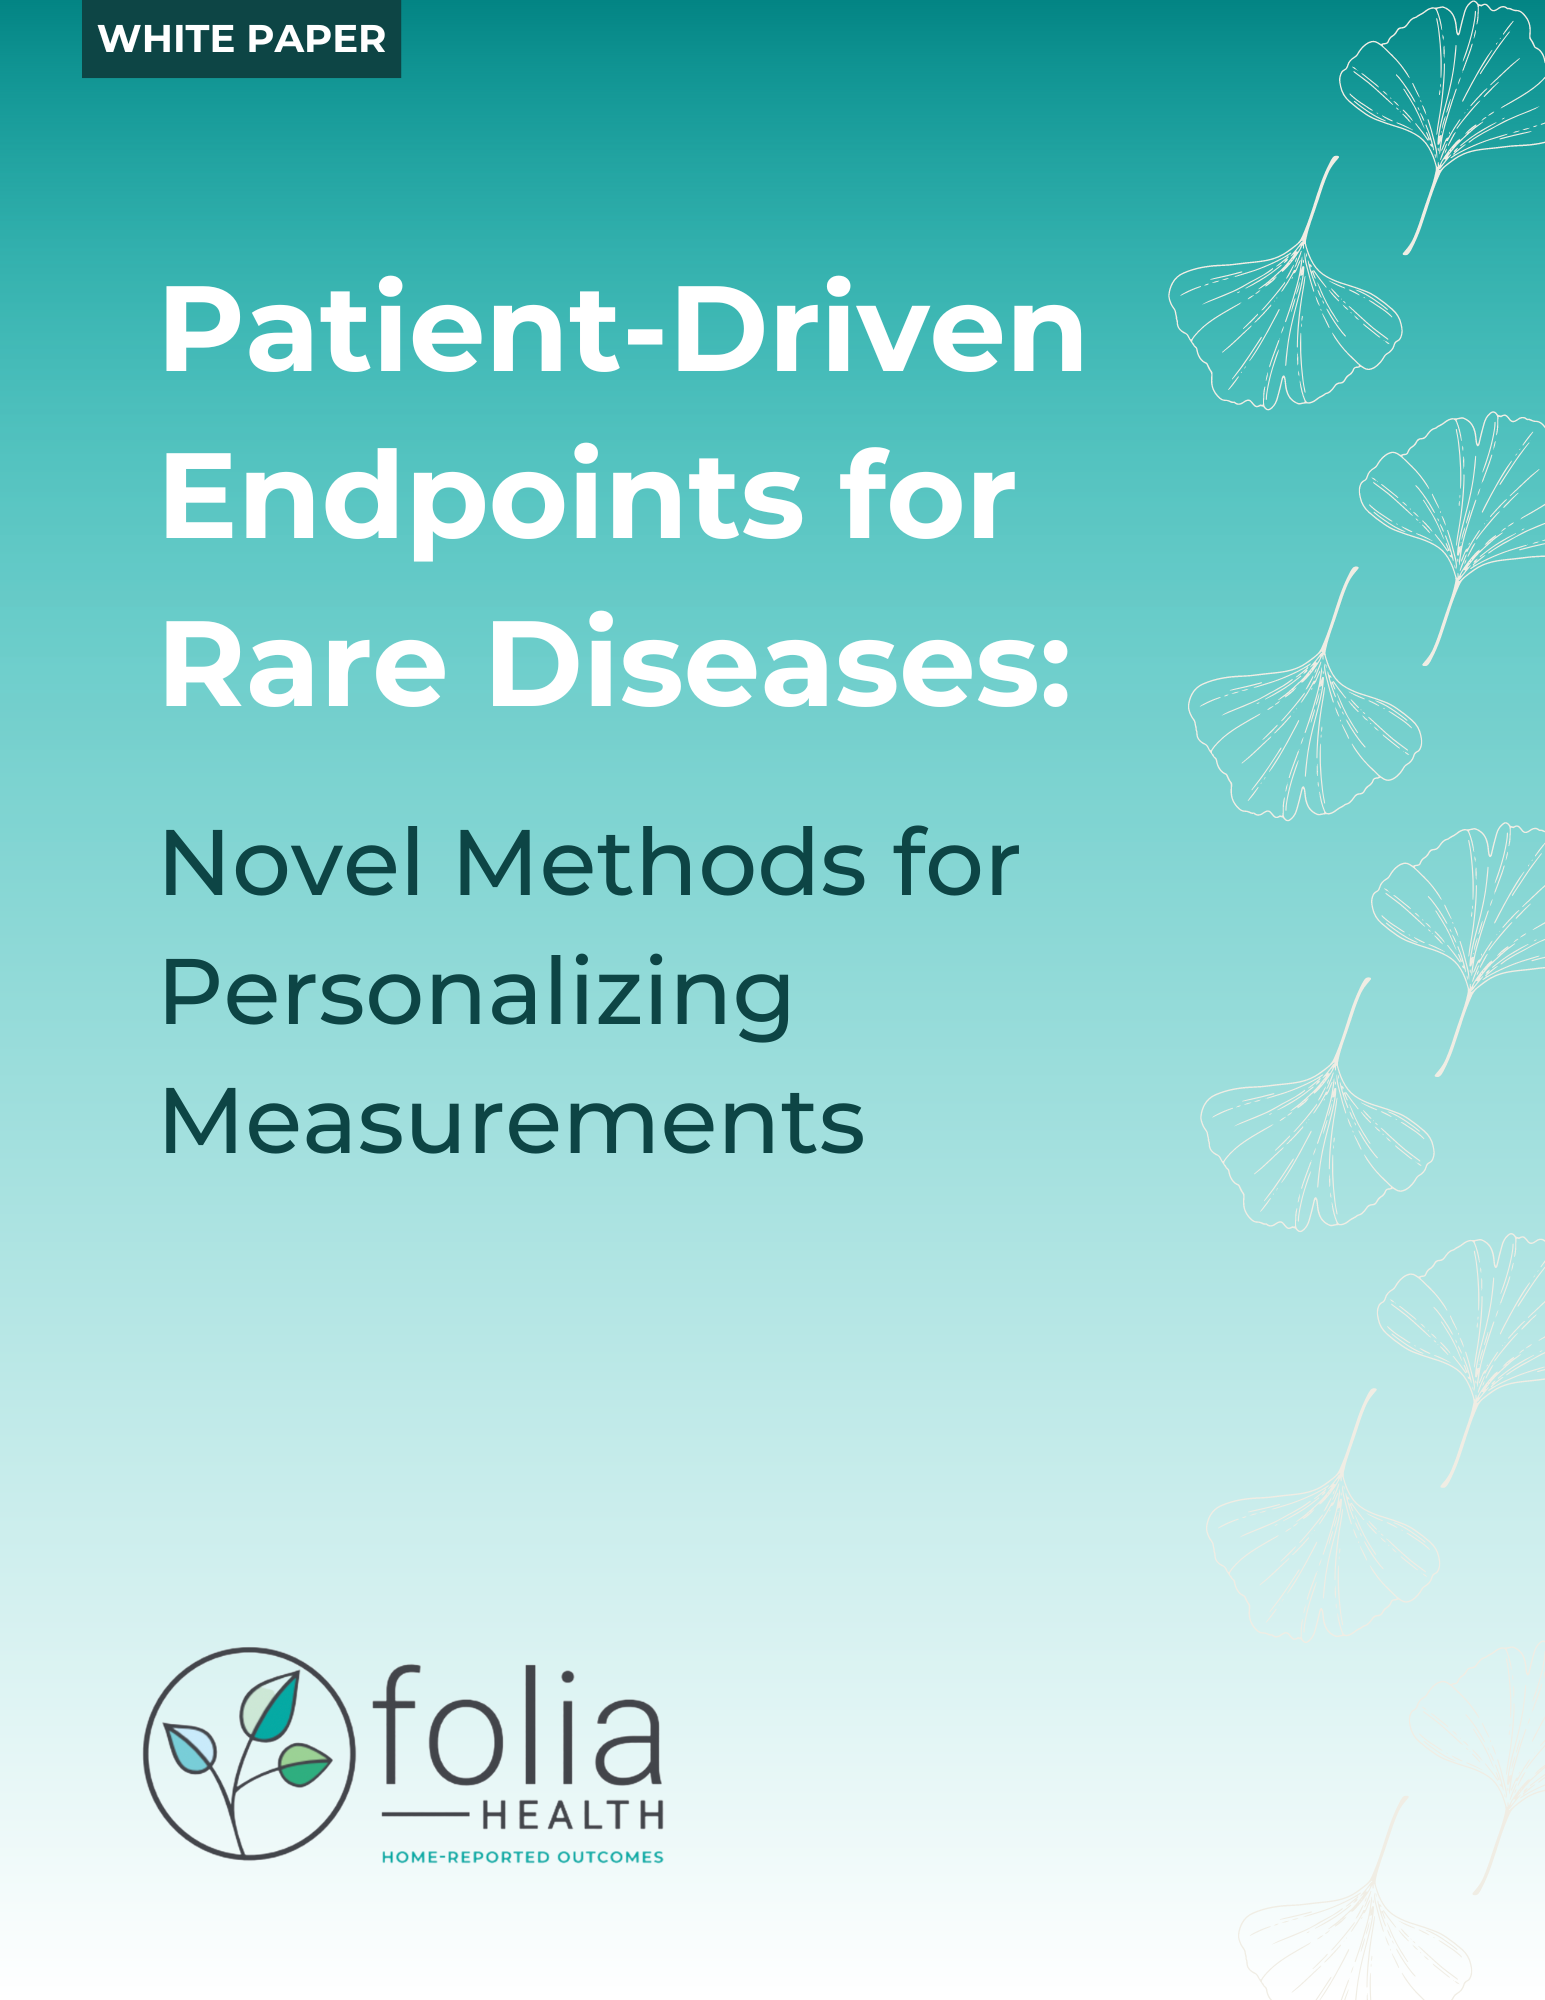 Novel Endpoints for Rare Diseases White Paper